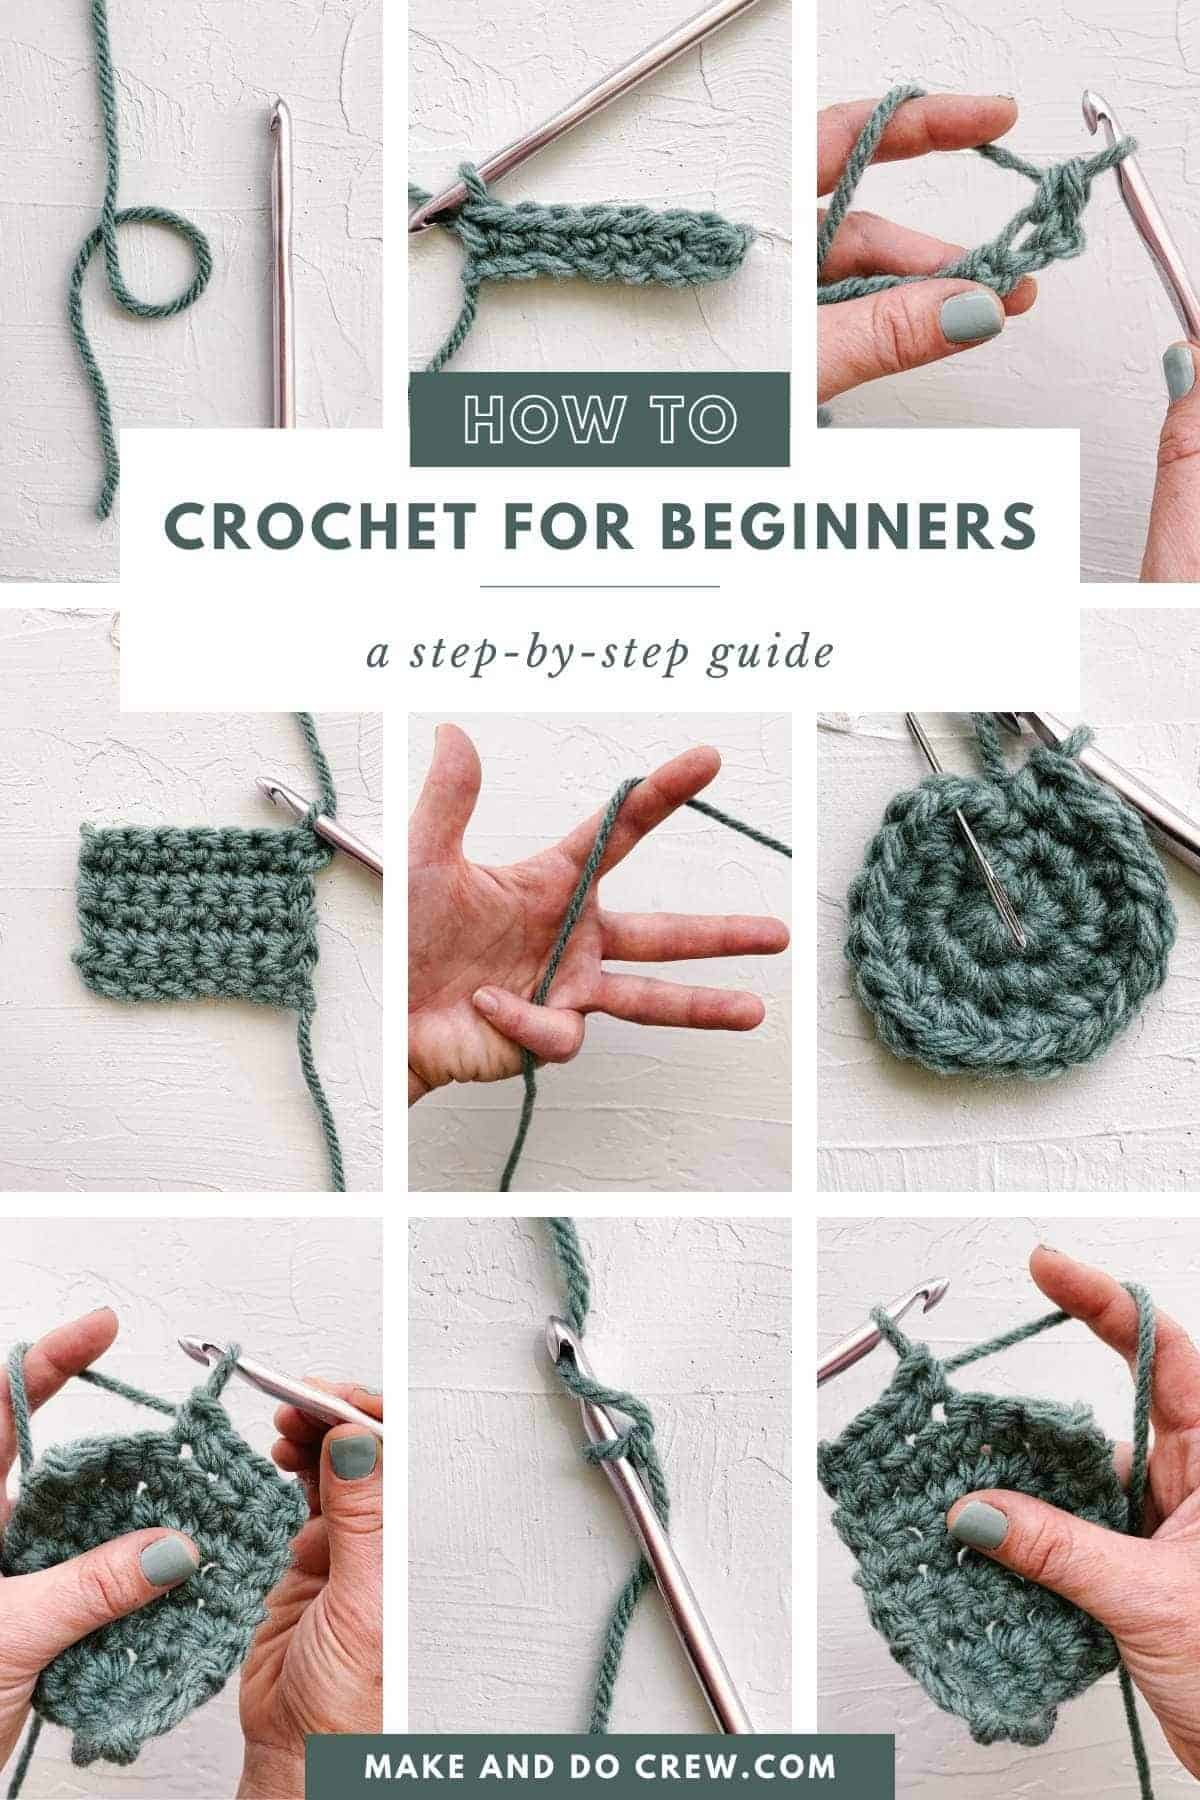 A grid photo tutorials on how to crochet.